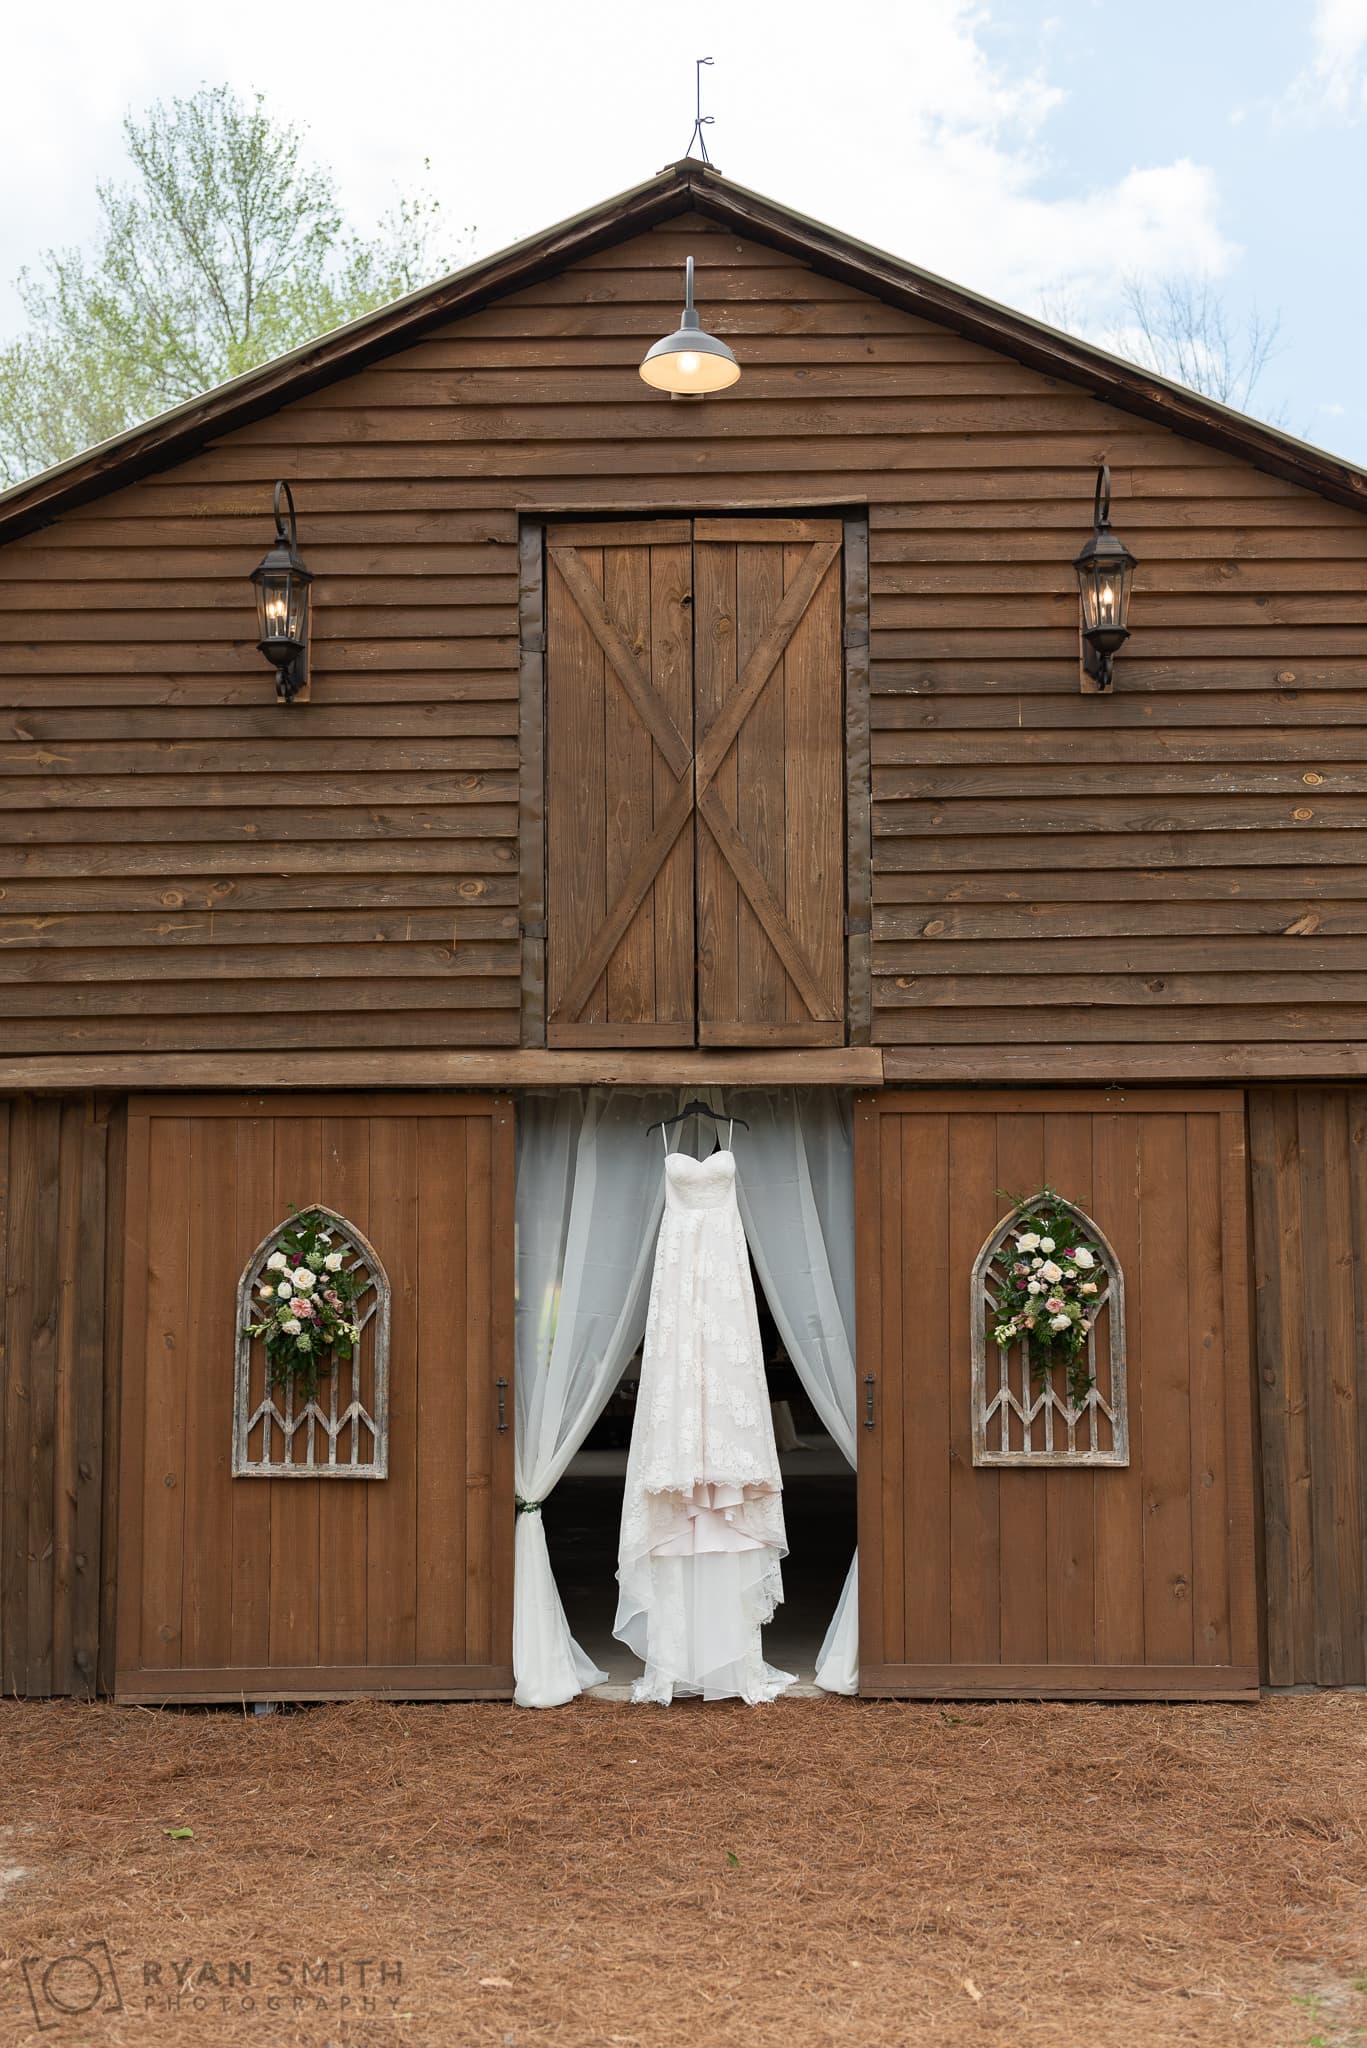 Dress hanging in the barn doorway - Wildhorse at Parker Farms